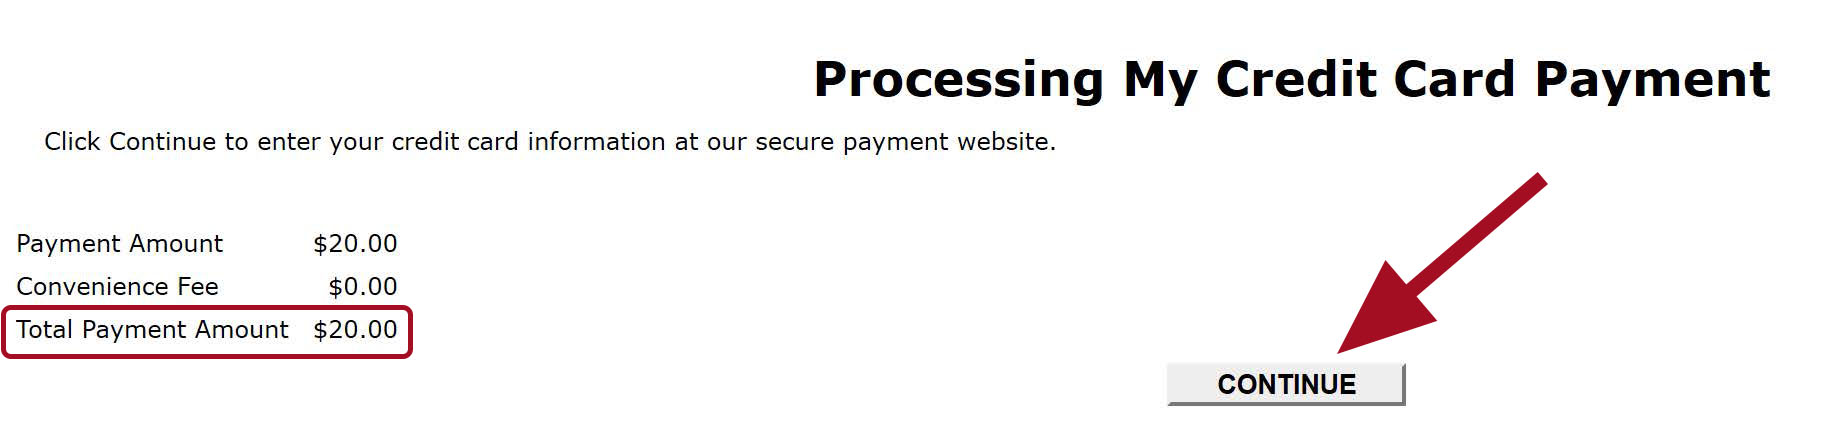 Processing My Credit Card Payment page. Red box highlighted around Total Payment Amount. Red arrow pointing towards Continue button at bottom of page.